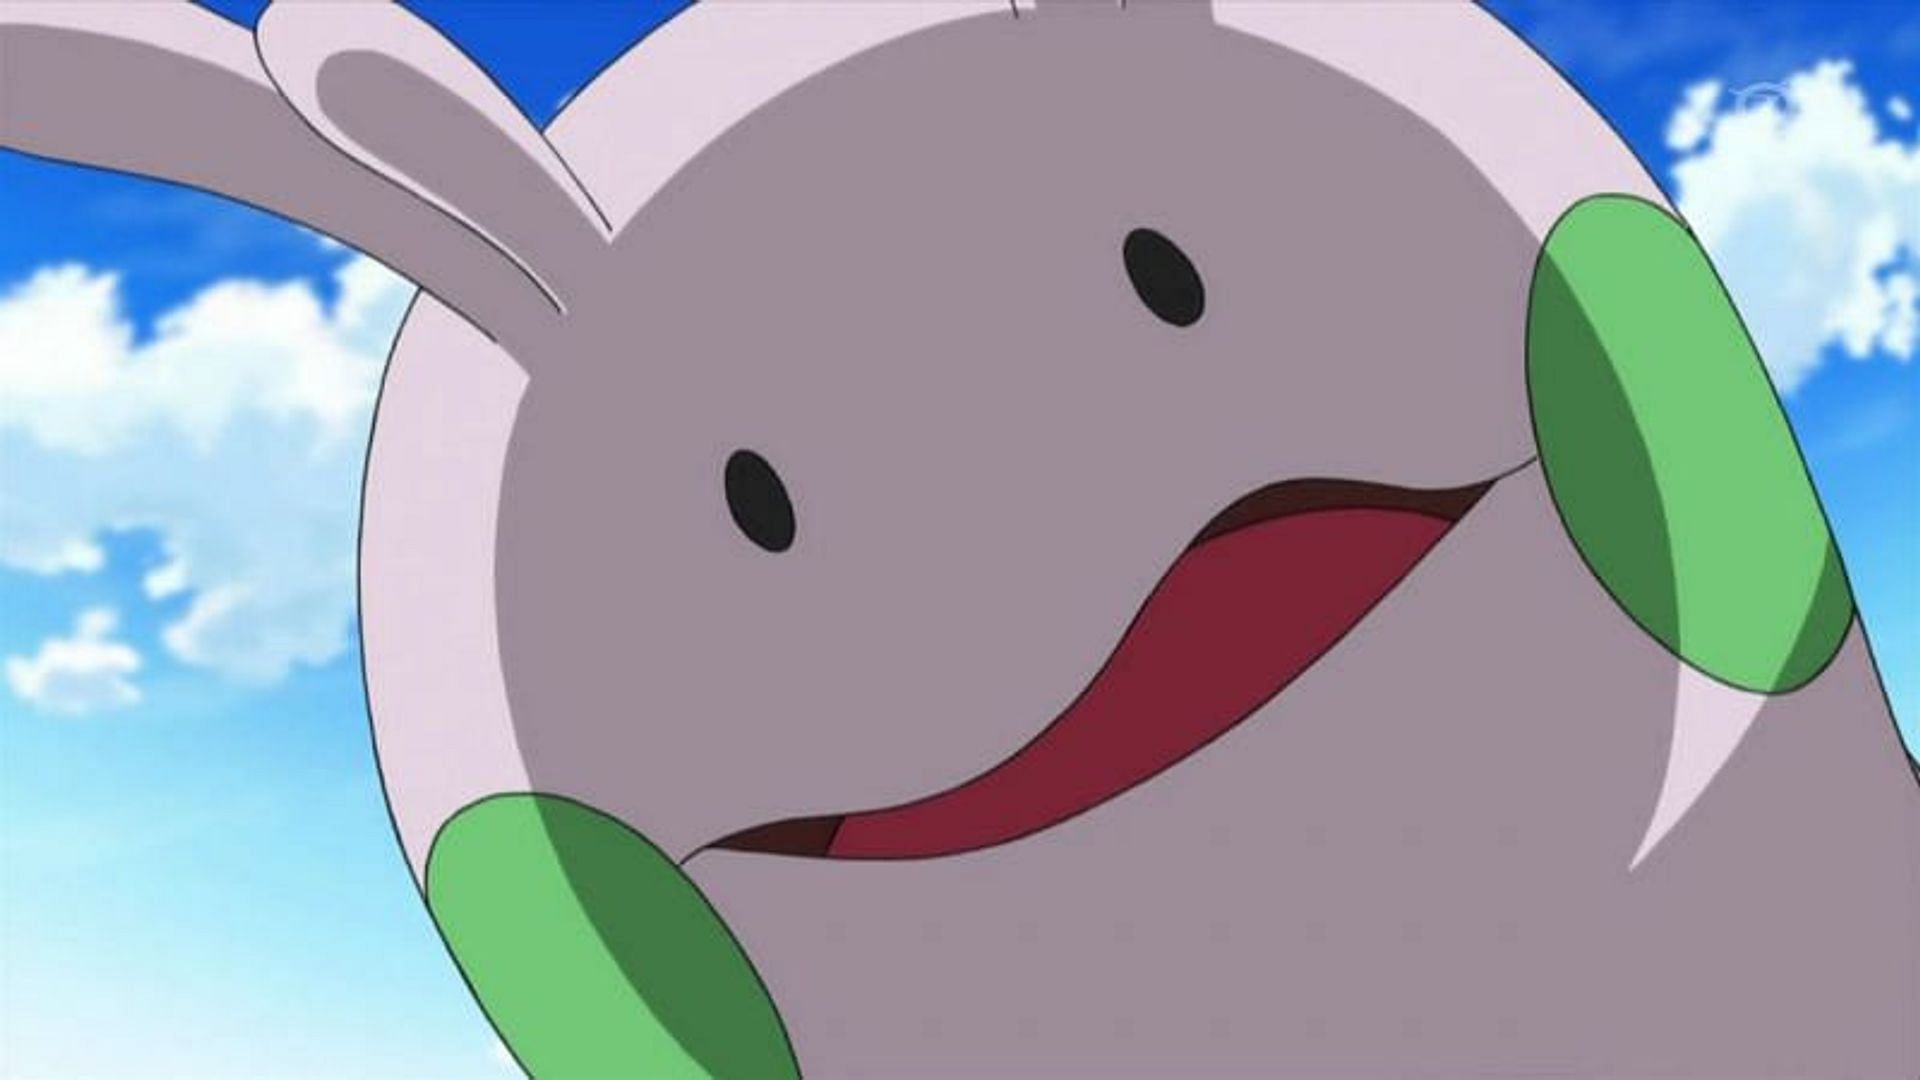 Goomy as it appears in the anime (Image via The Pokemon Company)